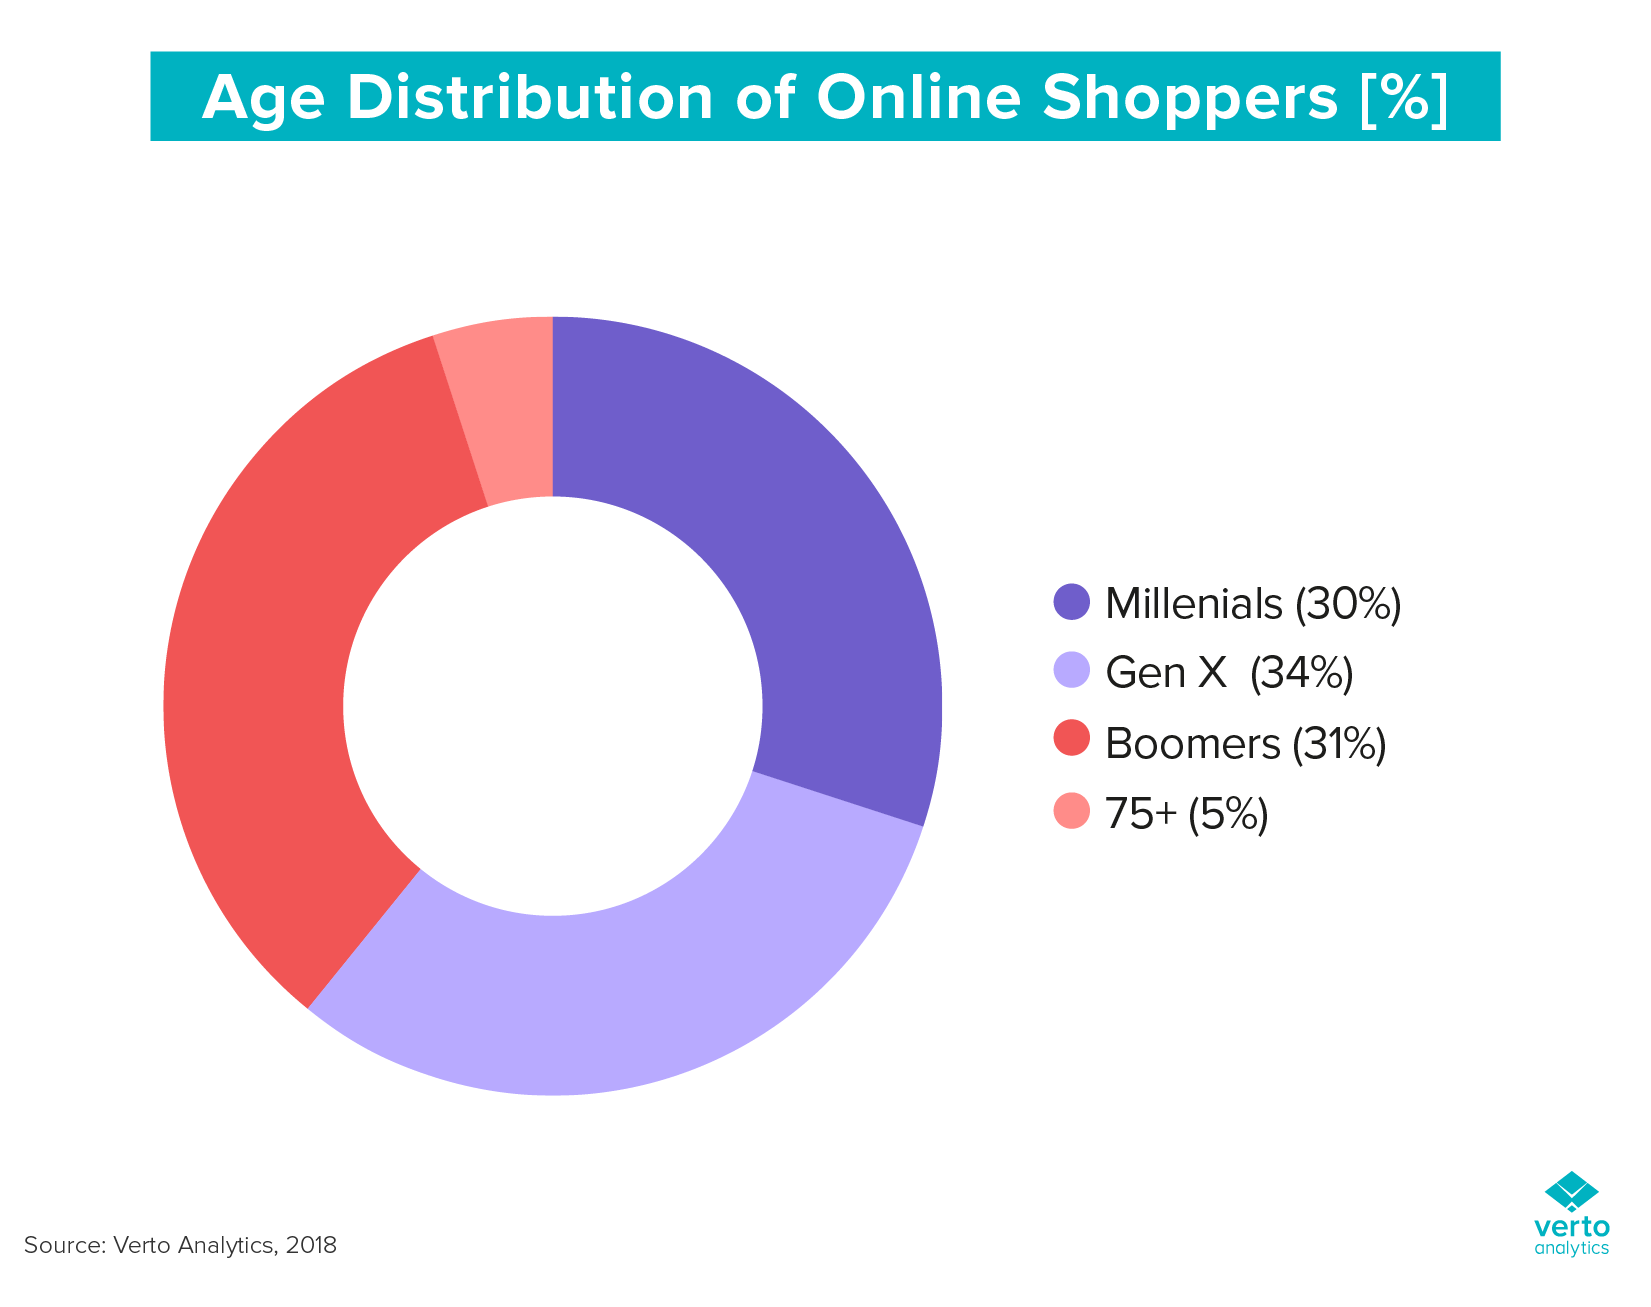 Age distribution of online shoppers